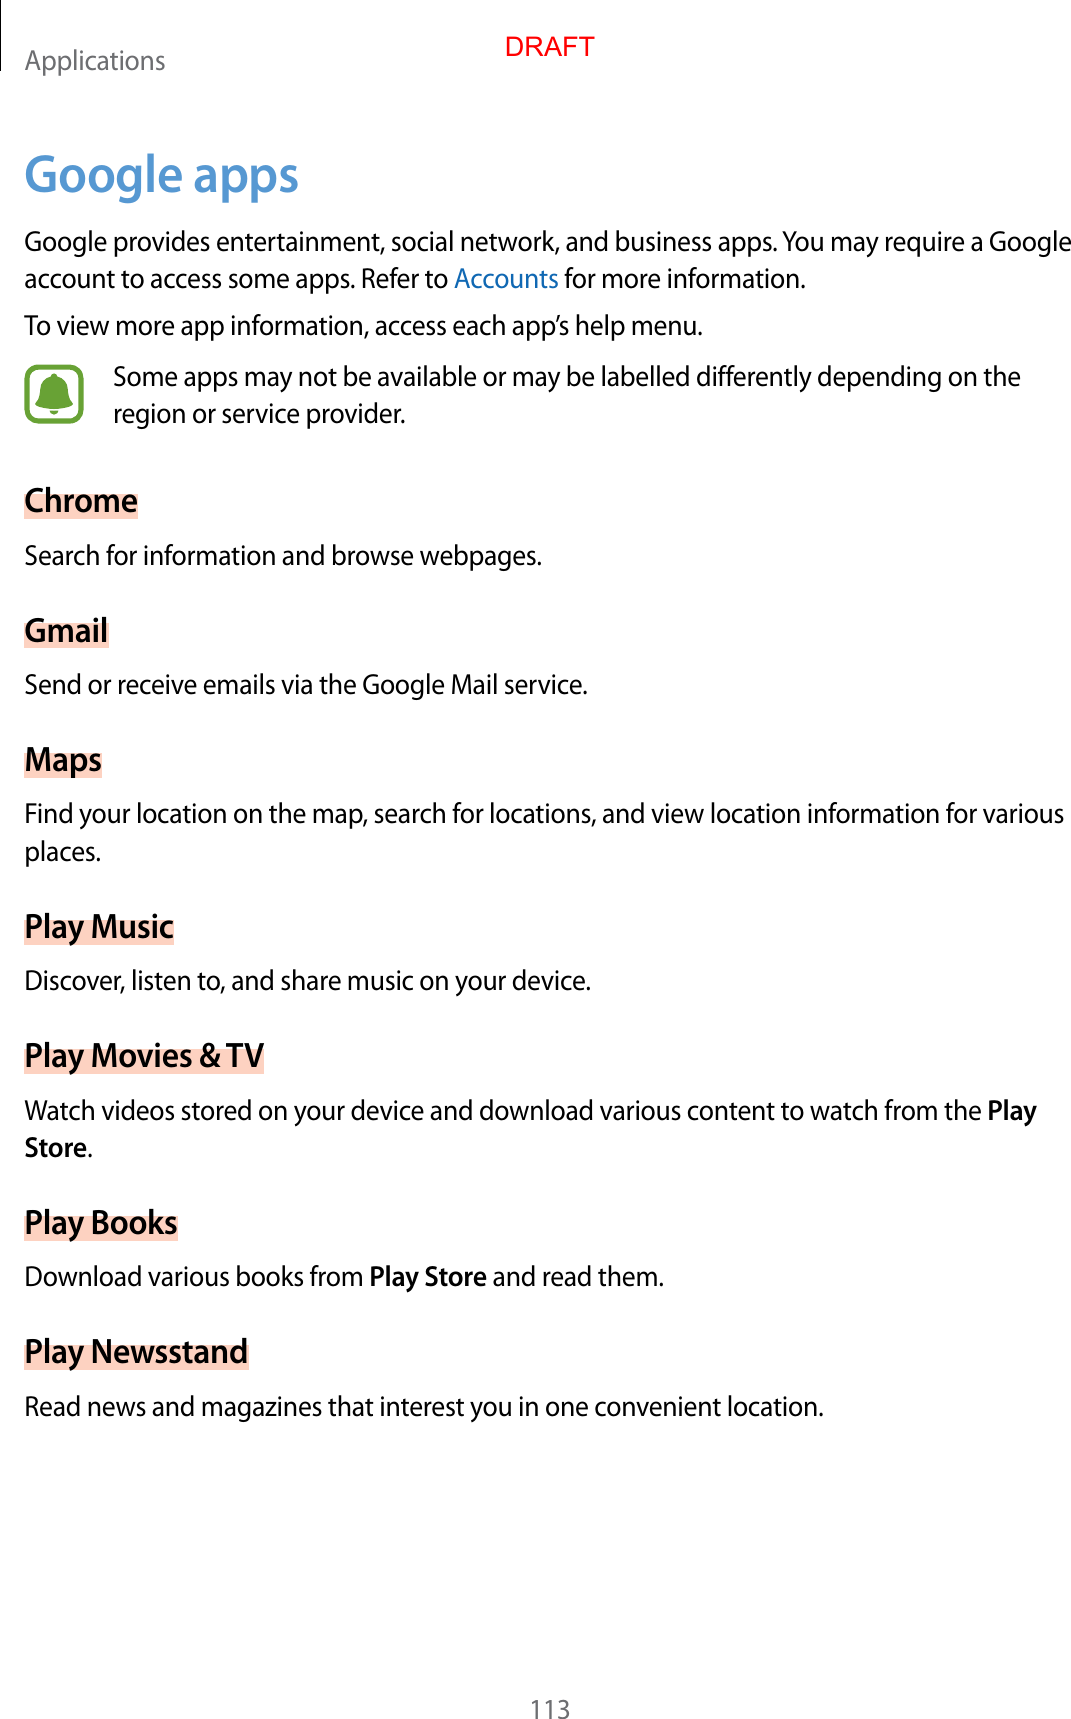 Applications113Google appsGoogle provides ent ertainment, social network, and business apps. You may requir e a Google account t o ac cess some apps . Ref er t o Accounts for mor e inf ormation.To view more app inf ormation, ac cess each app’s help menu.Some apps may not be available or ma y be labelled diff er en tly depending on the region or service provider.ChromeSearch for information and browse w ebpages .GmailSend or receiv e emails via the Google Mail service.MapsF ind y our loca tion on the map, search f or locations , and view location information for various places.Play MusicDiscov er, listen to, and share music on your devic e .Play Mo vies &amp; TVWatch videos stor ed on y our device and do wnload various c ont ent t o wat ch fr om the Play Store.Play BooksDownload various books from Play St or e and read them.Play Ne w sstandRead news and magazines that inter est y ou in one c on v enien t location.DRAFT